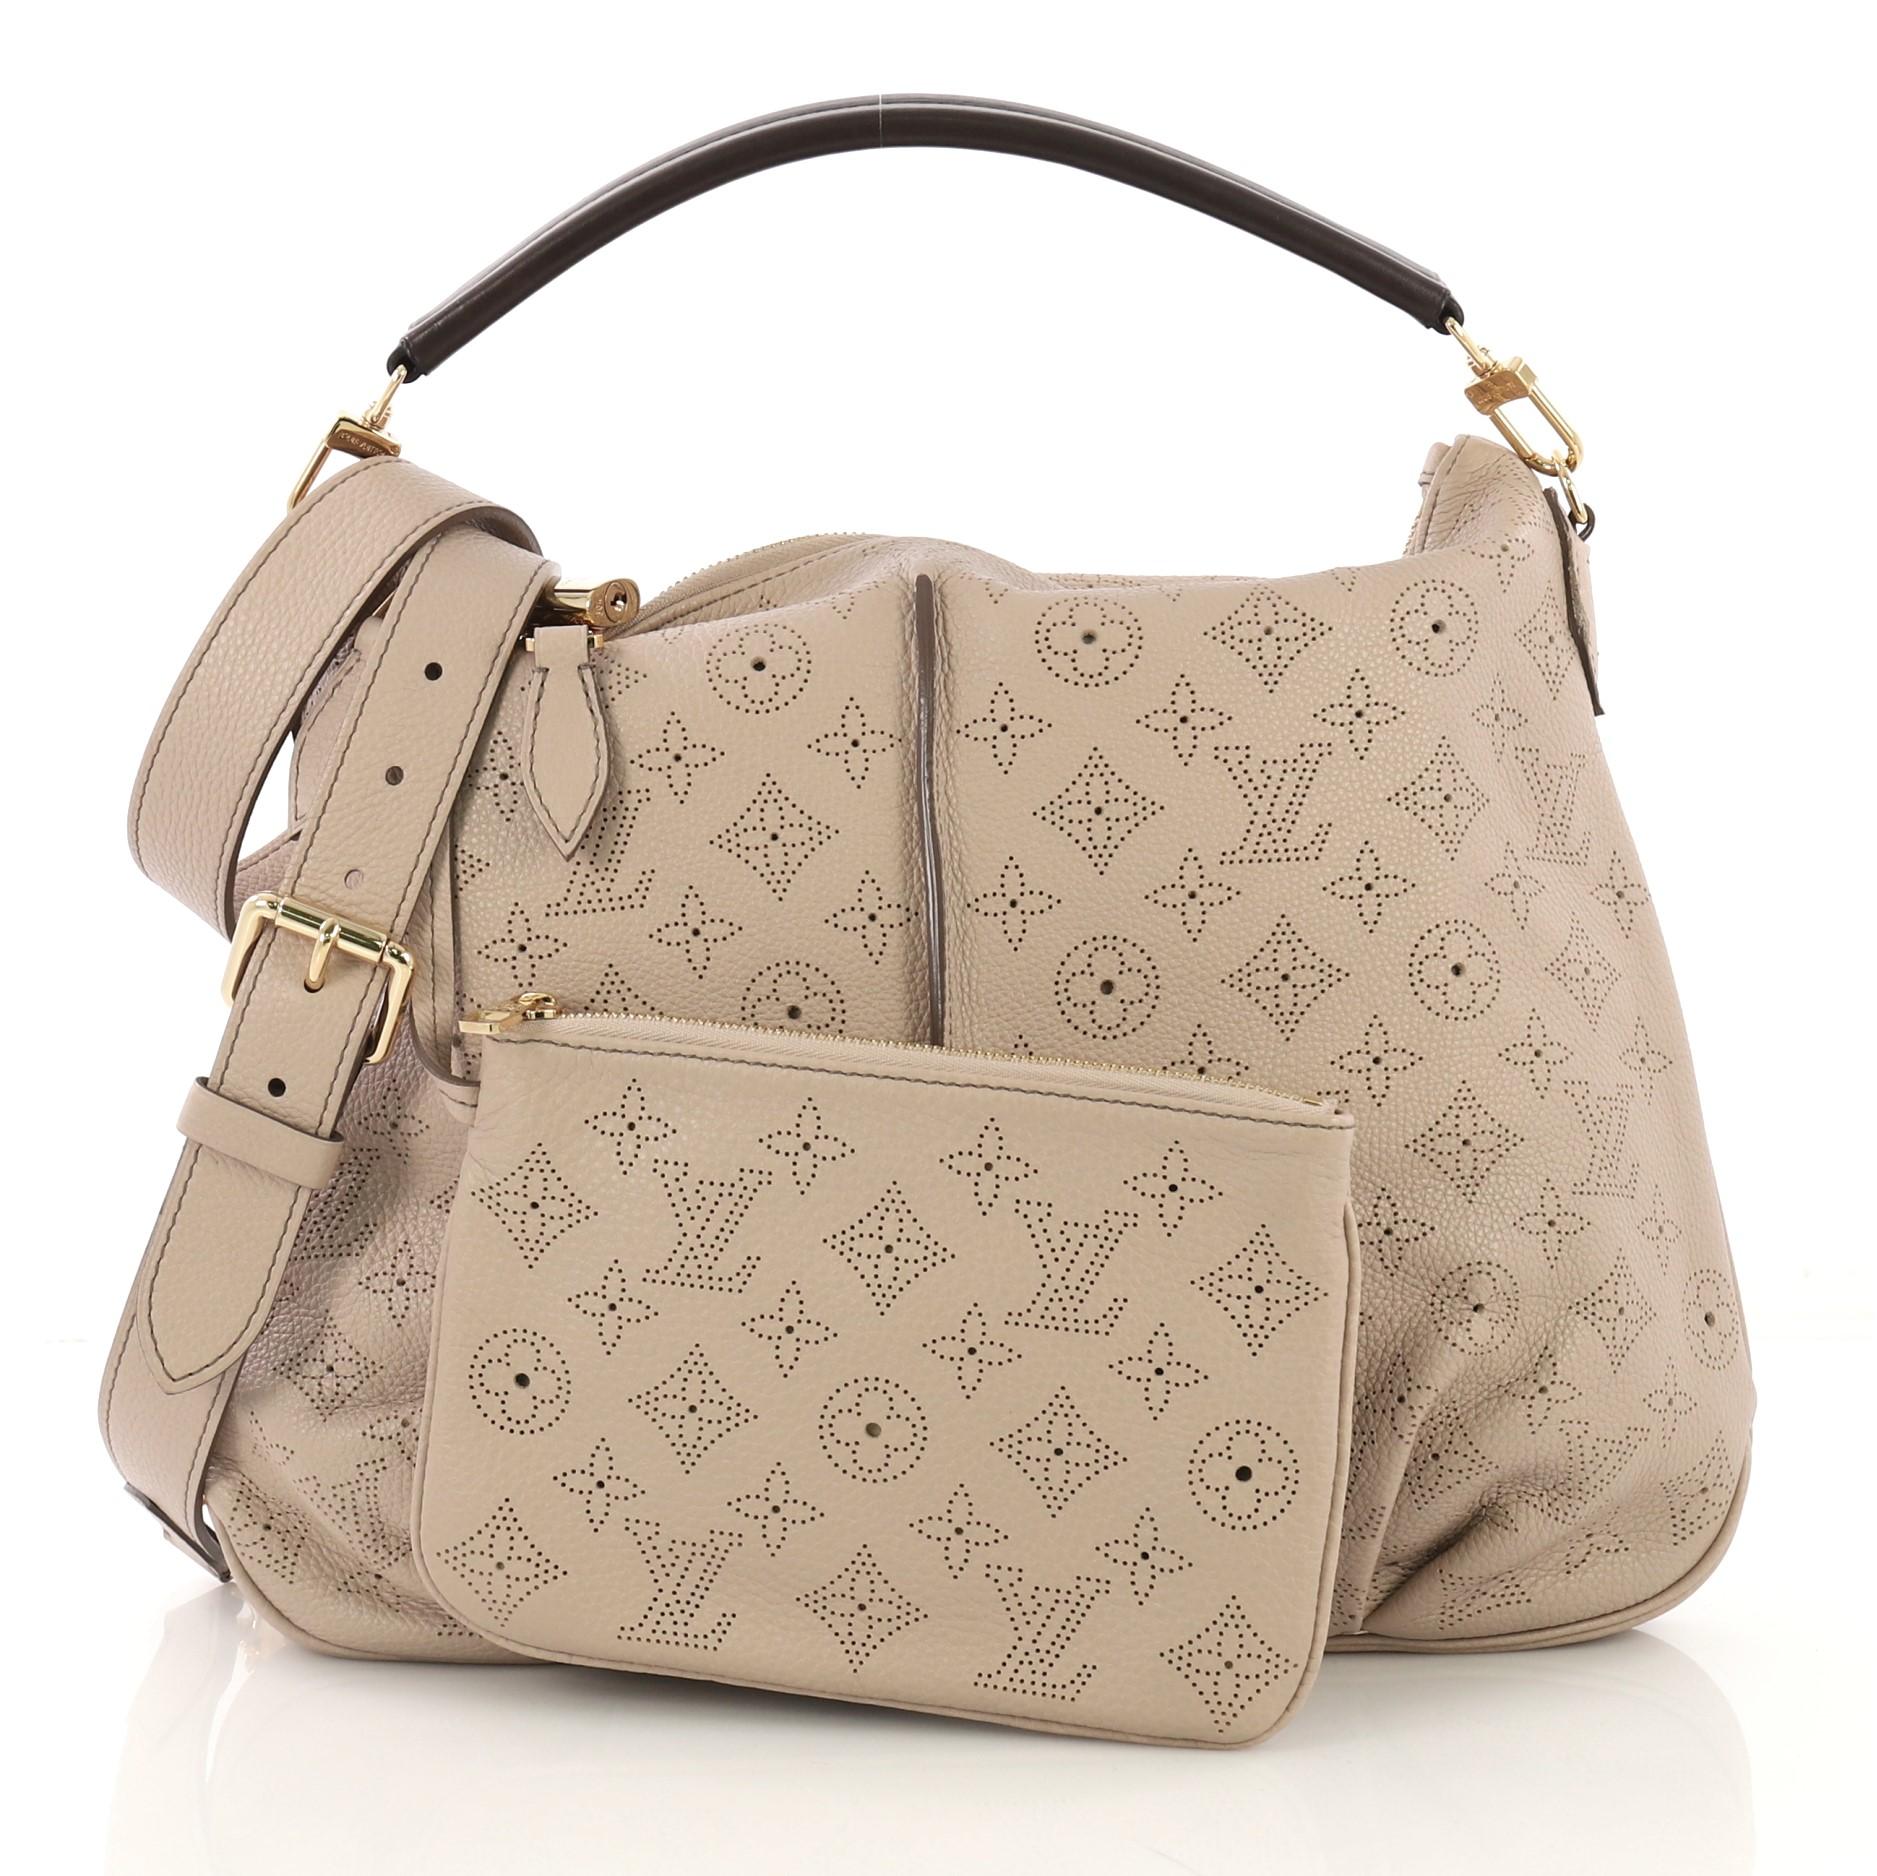 This Louis Vuitton Selene Handbag Mahina Leather PM, crafted from beige monogram perforated mahina leather, features a leather handle, pleated detailing, and gold-tone hardware. Its zip closure opens to a brown microfiber interior with side zip and